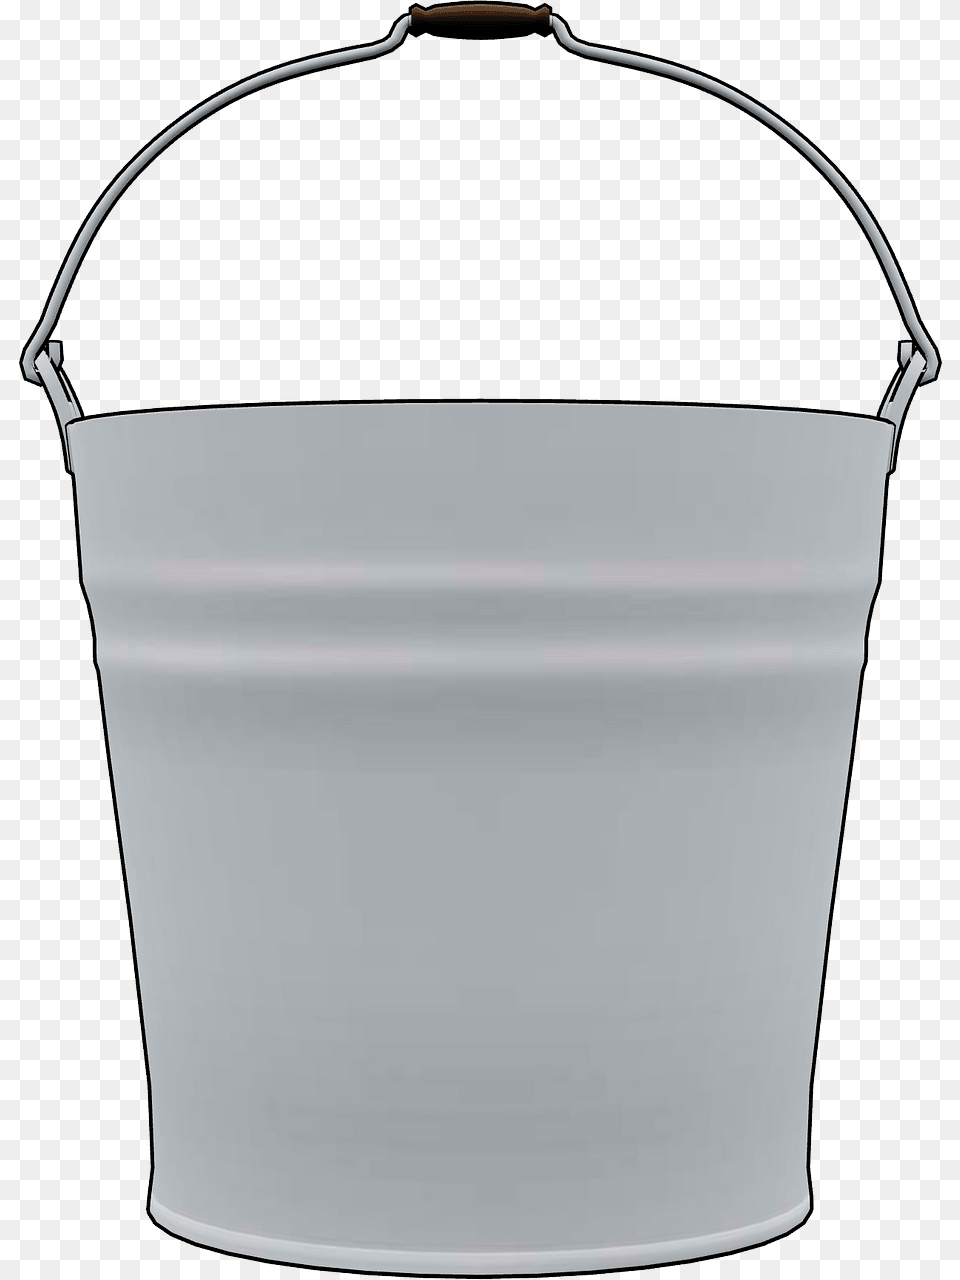 Bucket Clipart Png Image